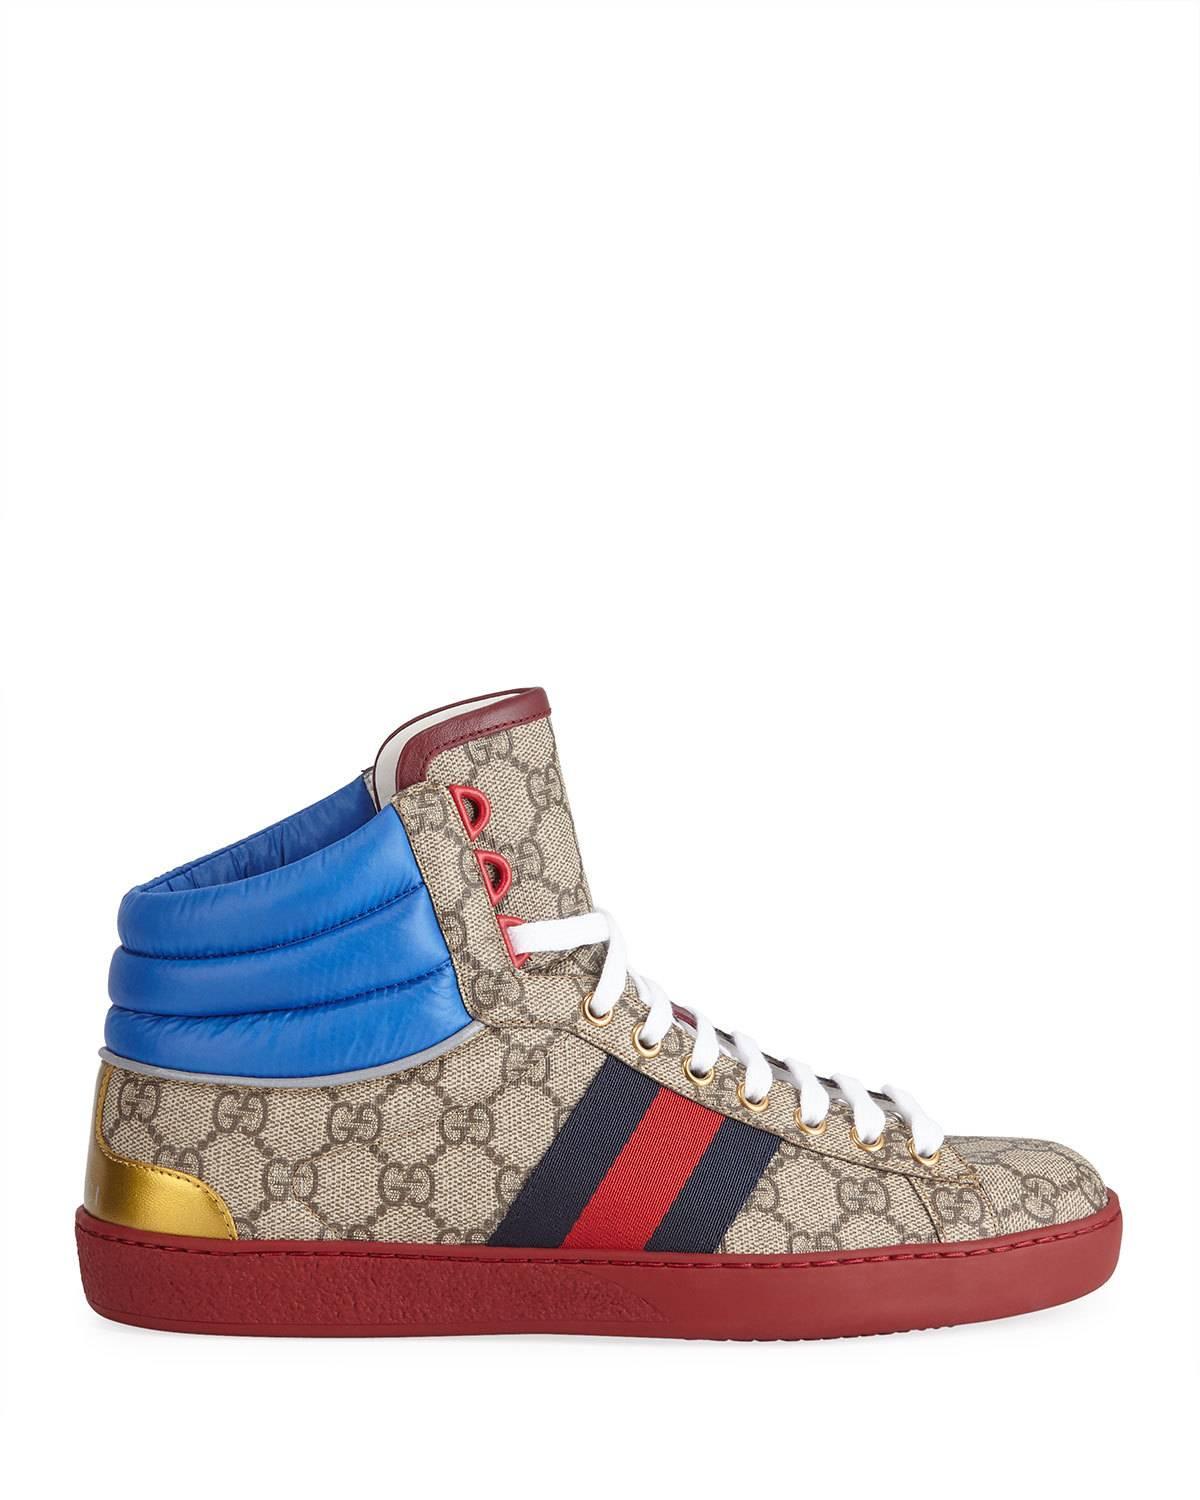 Gucci Canvas Men's Ace GG High-top Sneakers in Brown for Men - Lyst